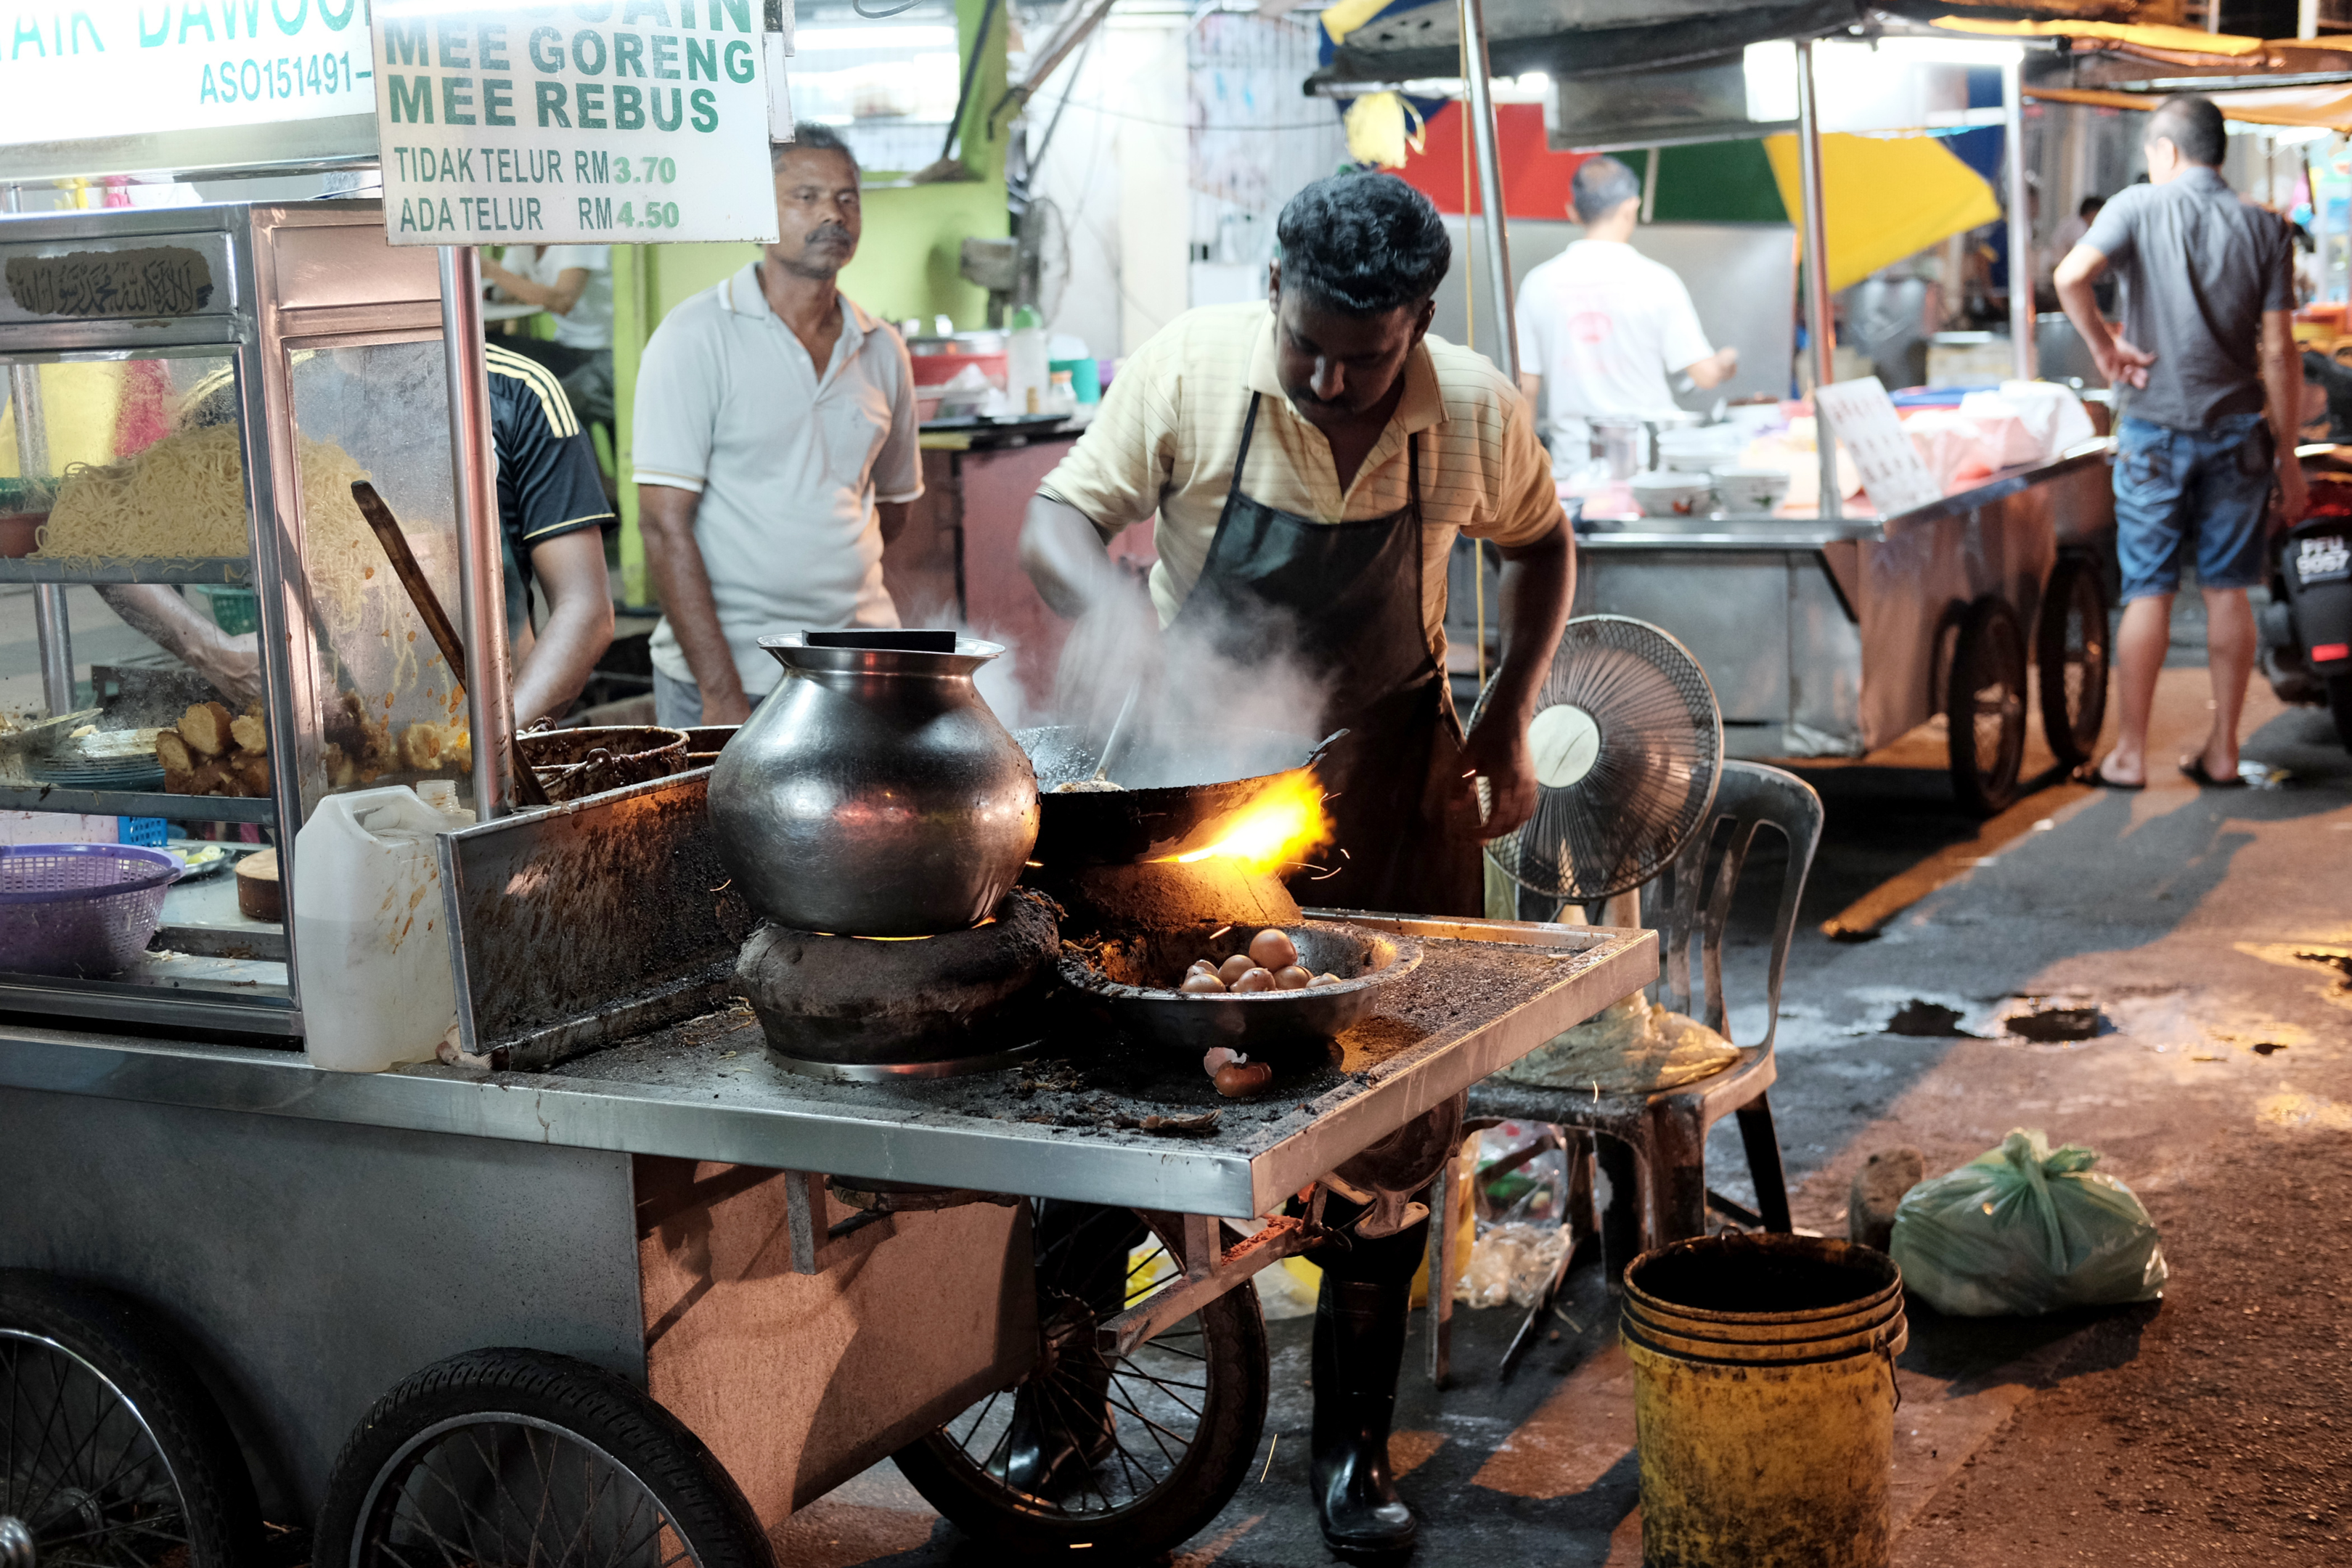 The street food in Jelutong city, such as nasi kandar is an unique place by the night market